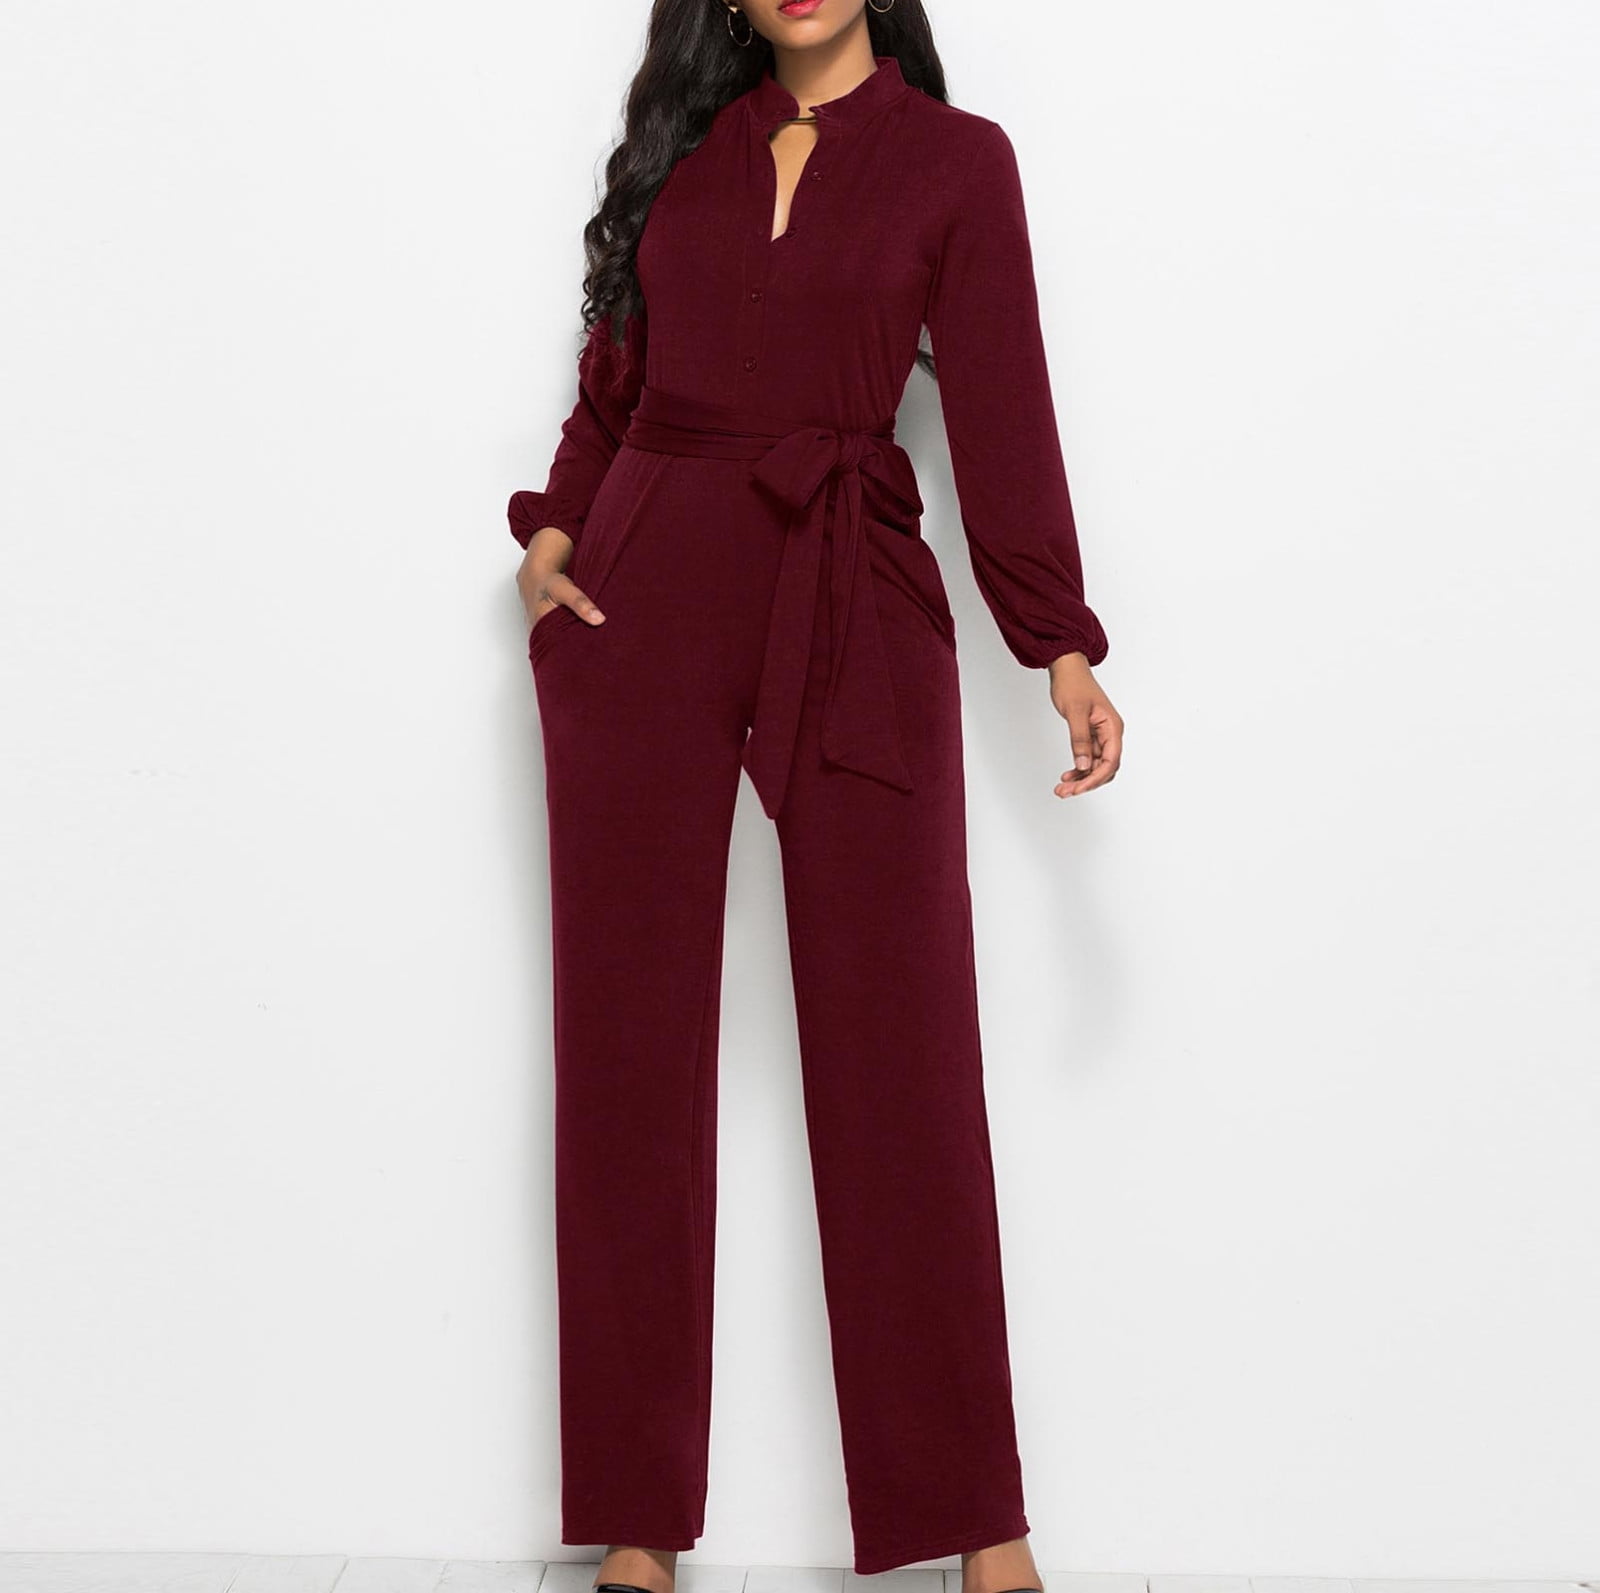 Posijego Womens Button Up Long Sleeve Jumpsuit Oversized Loose Tie Waist  Belt with Pockets Casual Office